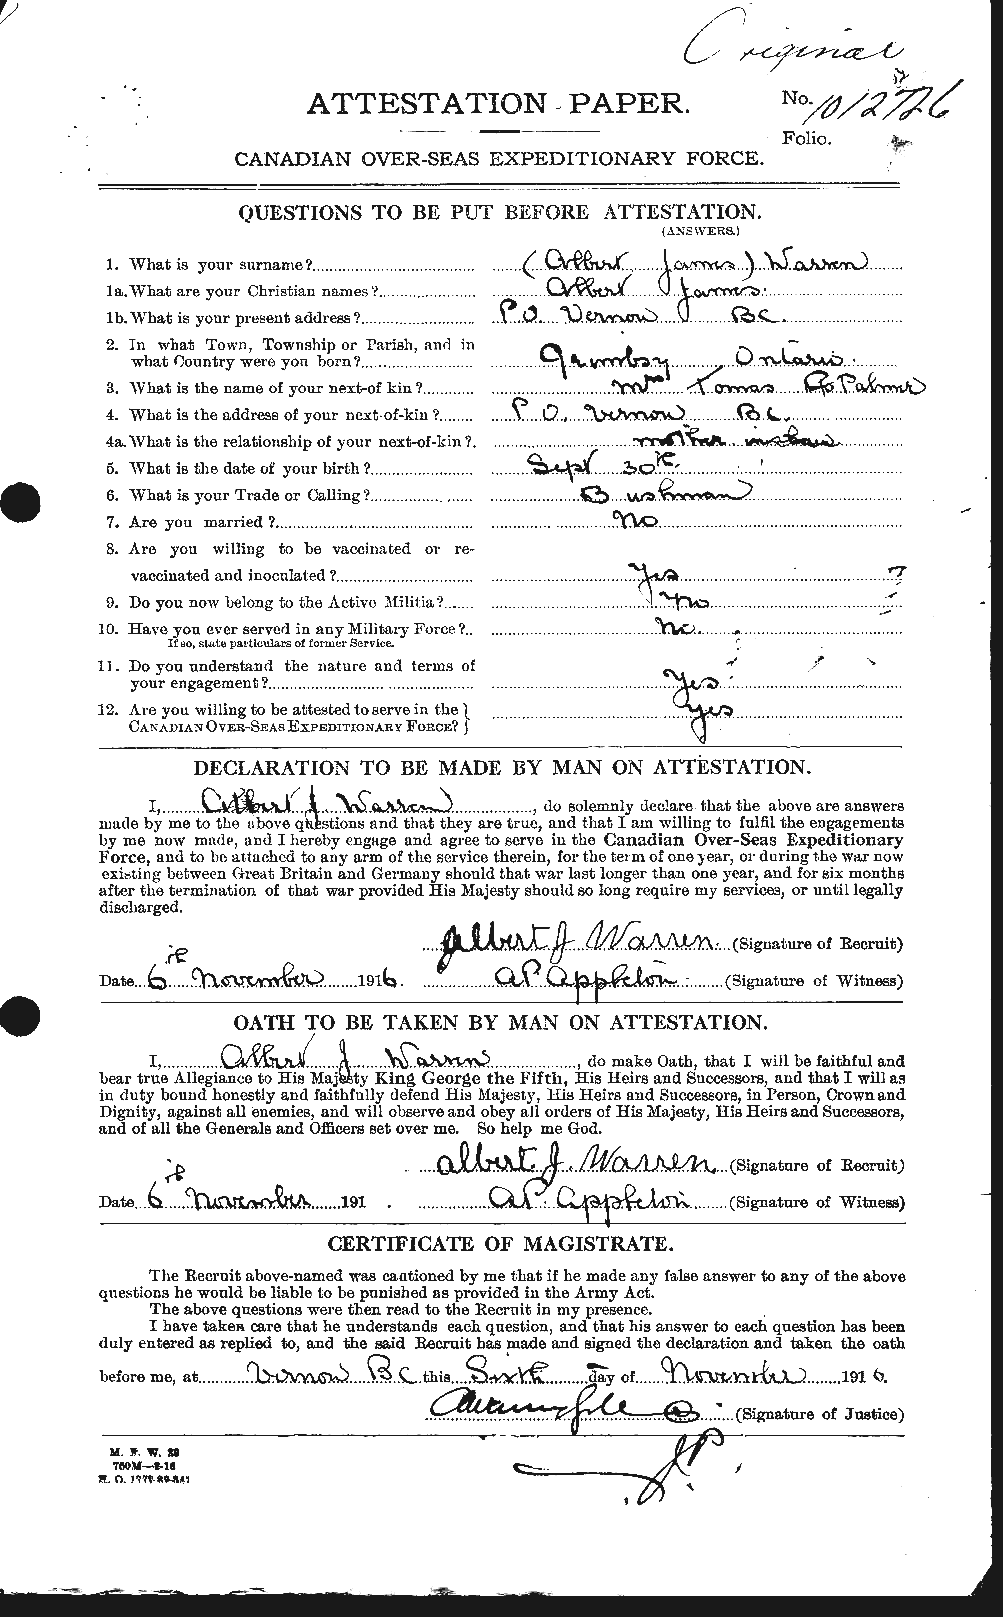 Personnel Records of the First World War - CEF 658339a